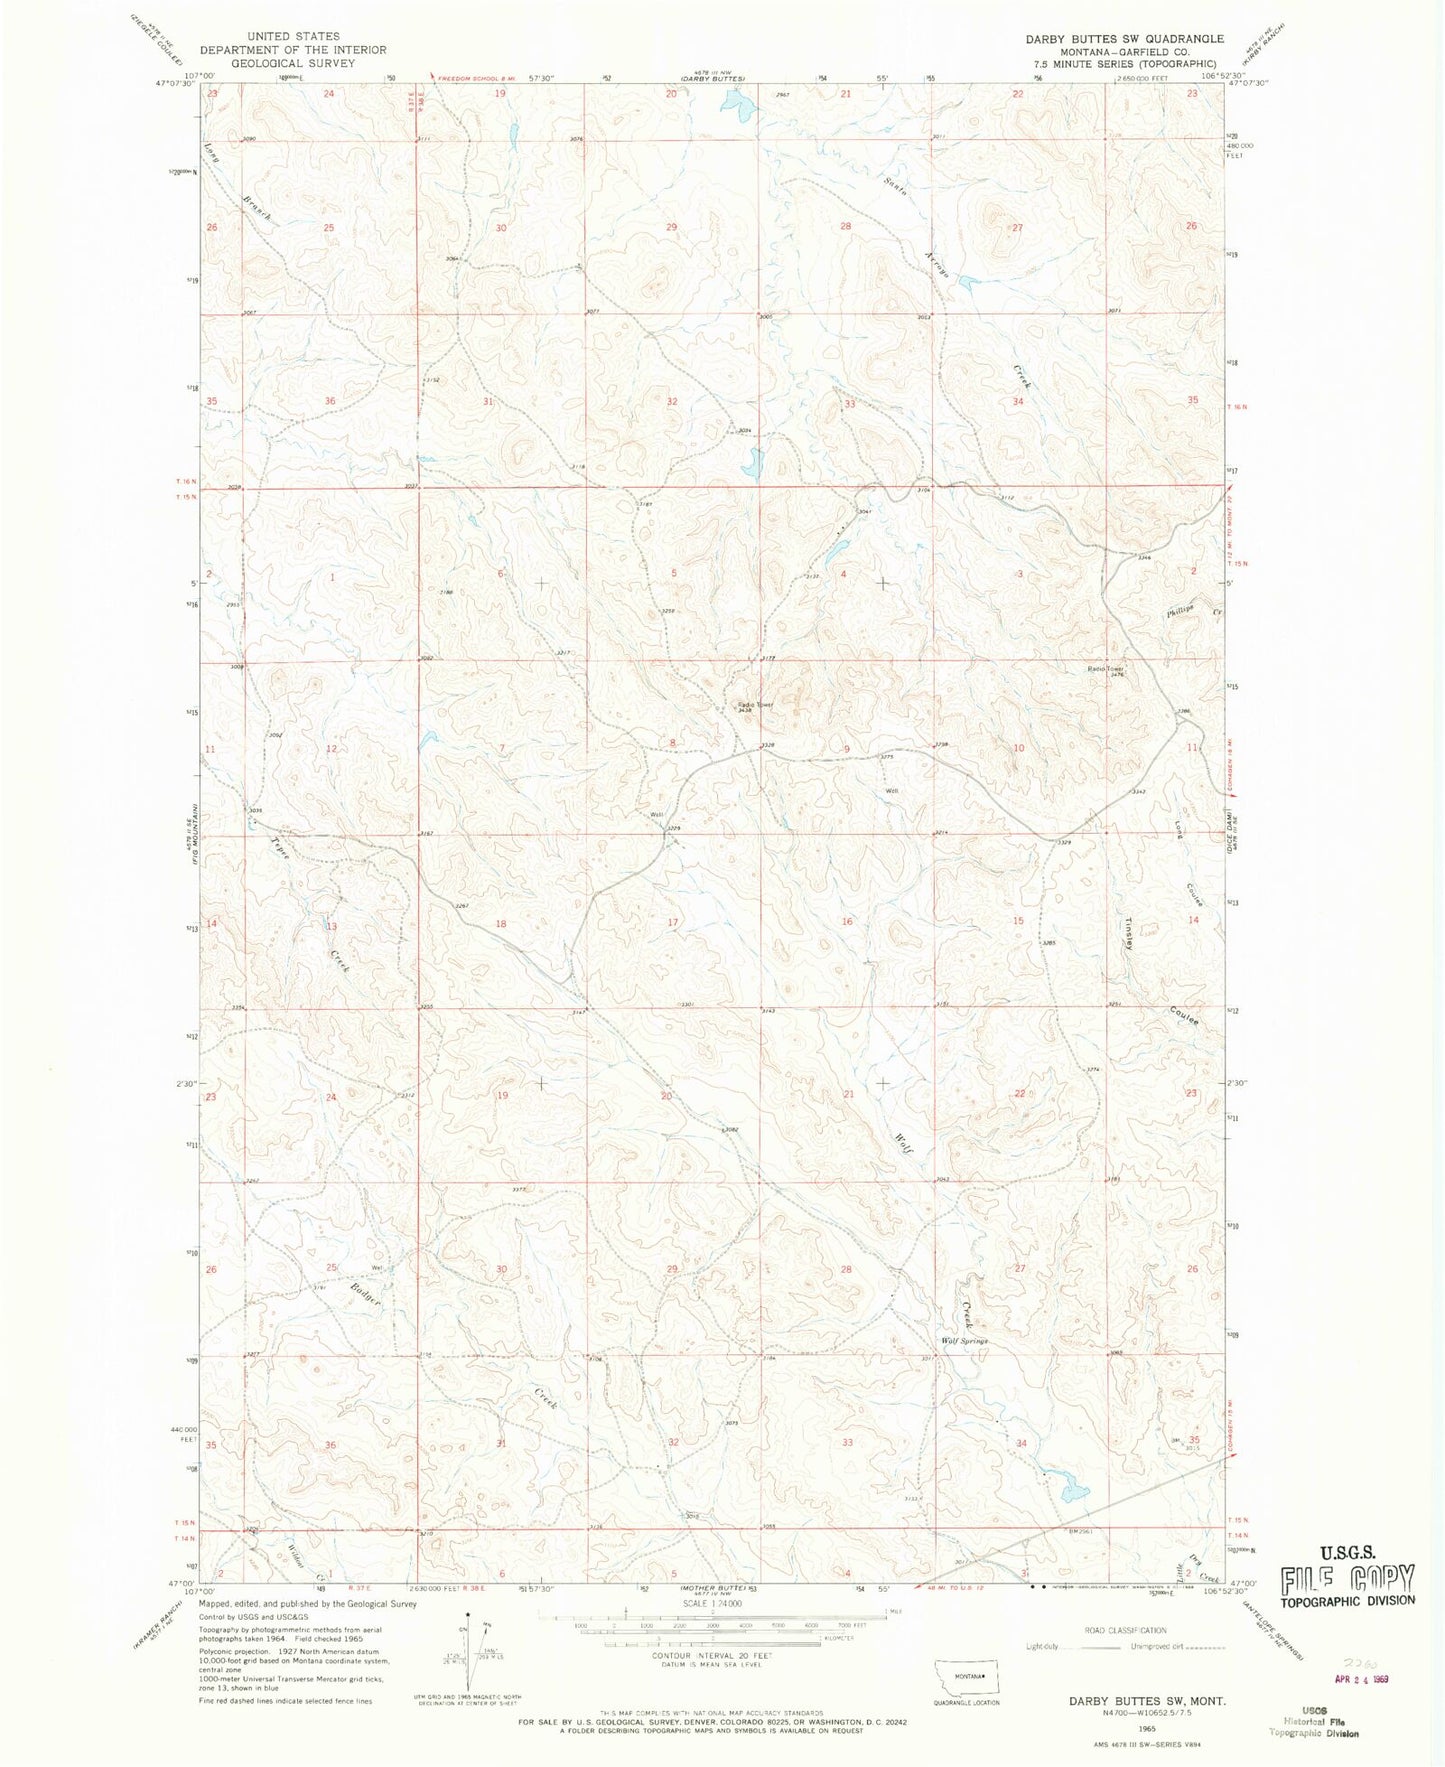 Classic USGS Darby Buttes SW Montana 7.5'x7.5' Topo Map Image